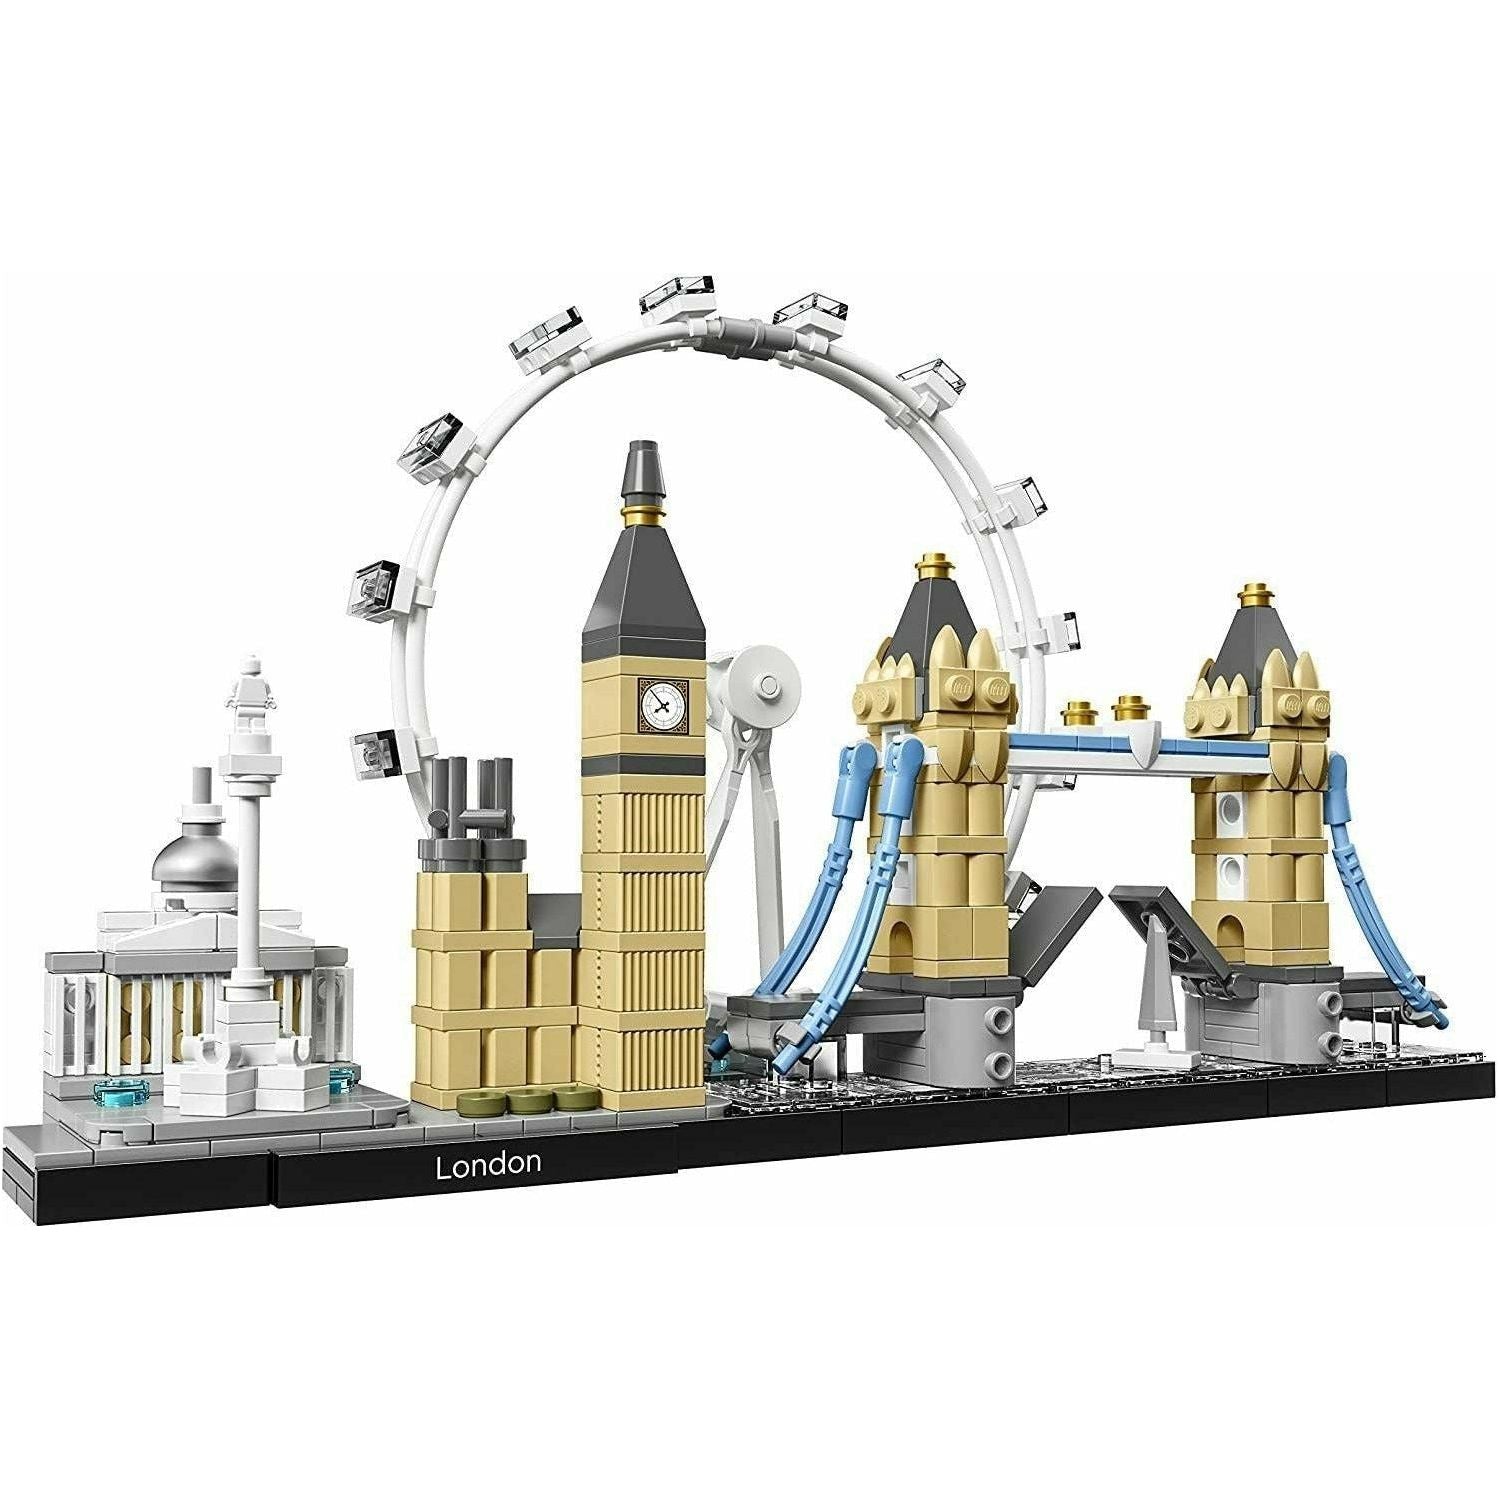 LEGO Architecture London Skyline Collection 21034 Building Set Model Kit and Gift for Kids and Adults (468 Pieces) - BumbleToys - 18+, Architecture, Boys, LEGO, OXE, Pre-Order